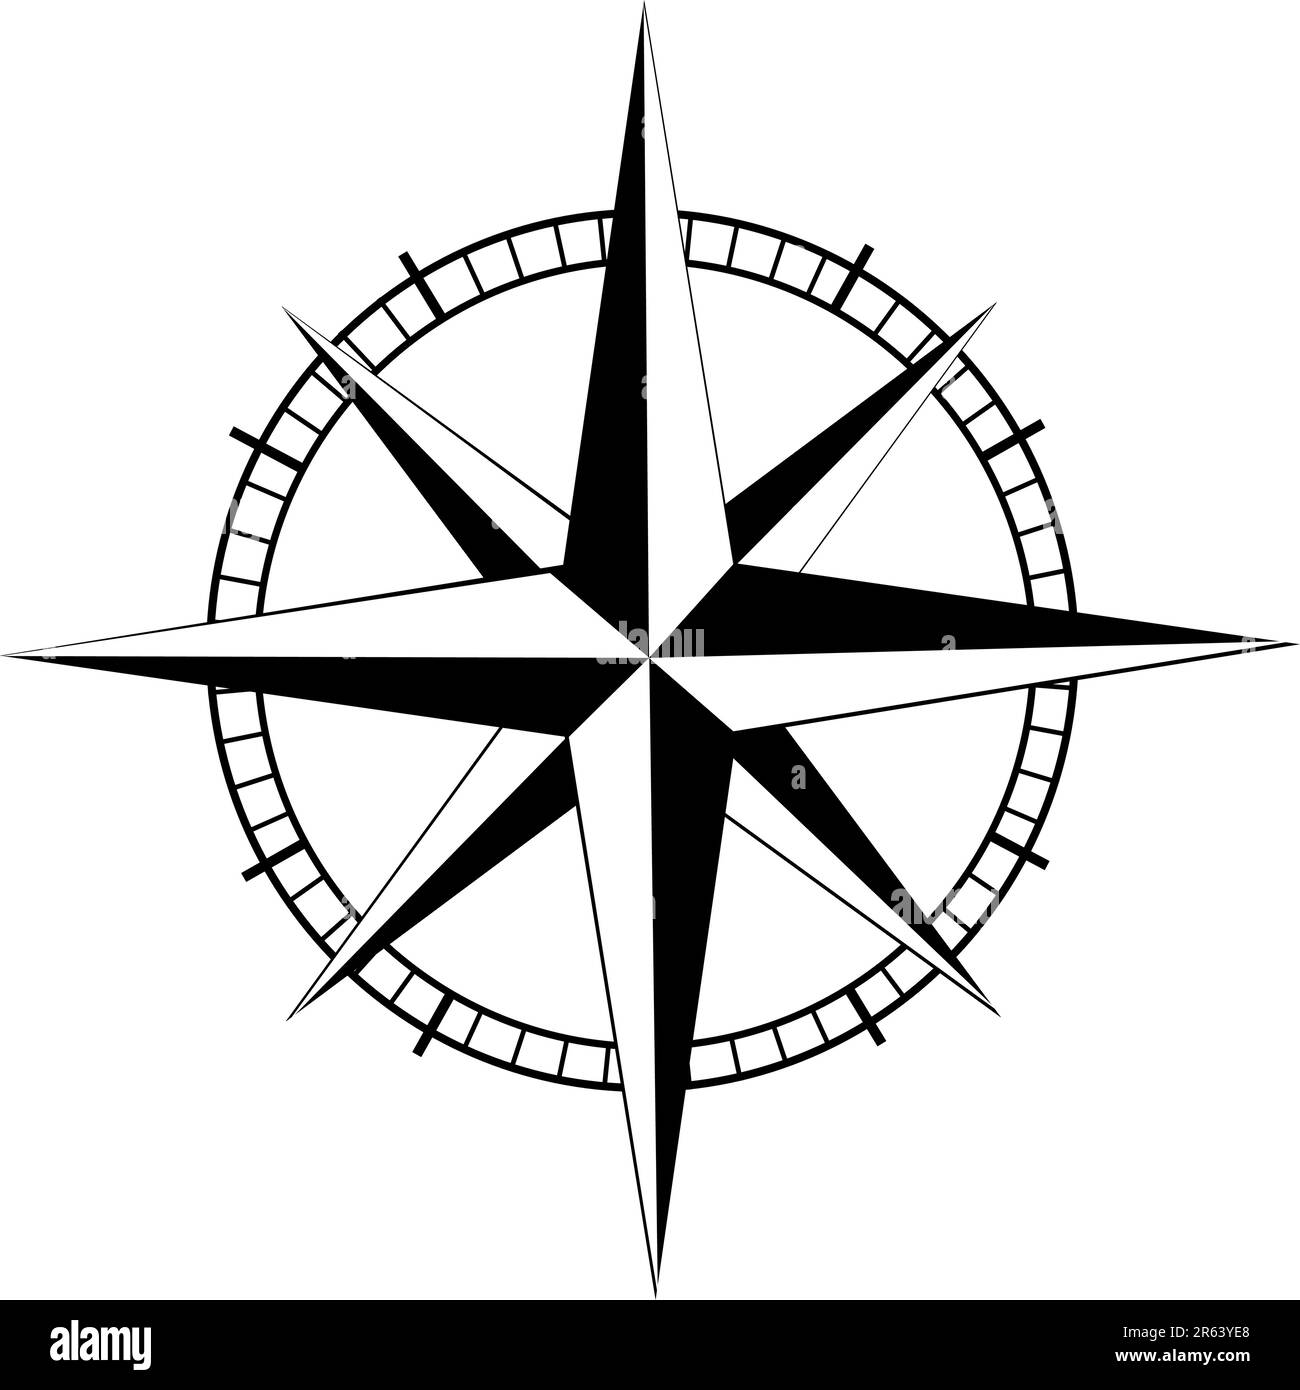 Small Black Pirate Captain Ship Spear Temporary Tattoos For Adults Boys Arm  Tatoos Smiley Compass Lighthouse Fake Tattoo Sticker